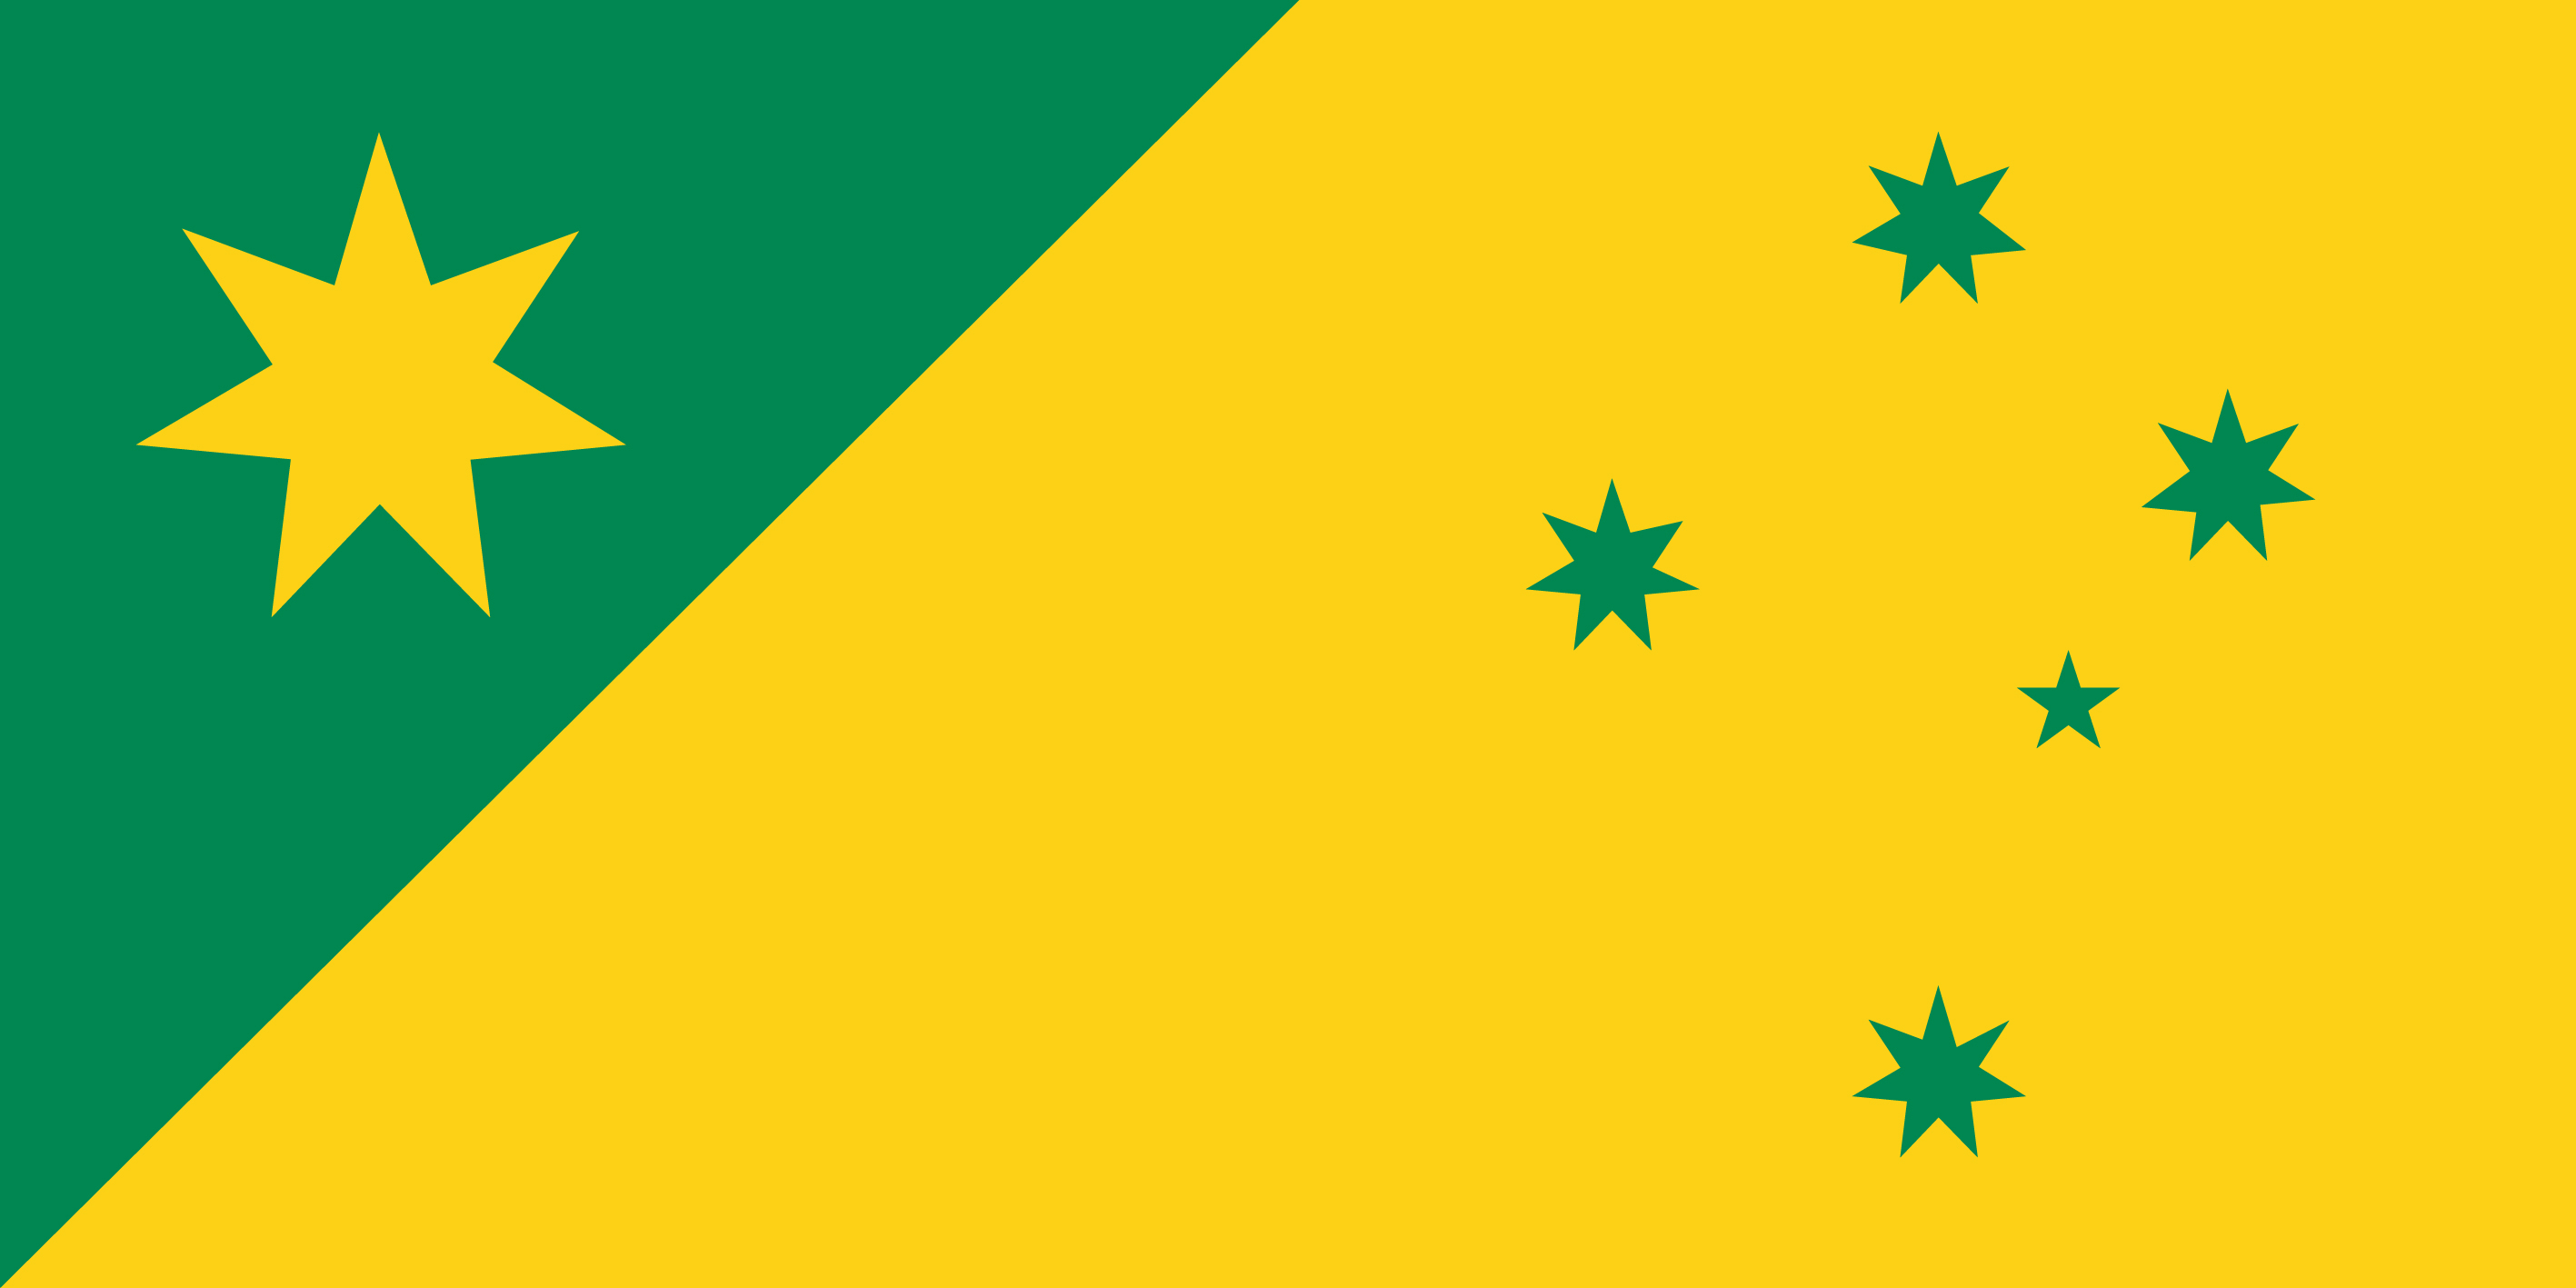 File:Proposed Australian Flag - Traditional Green and Gold 2.jpg